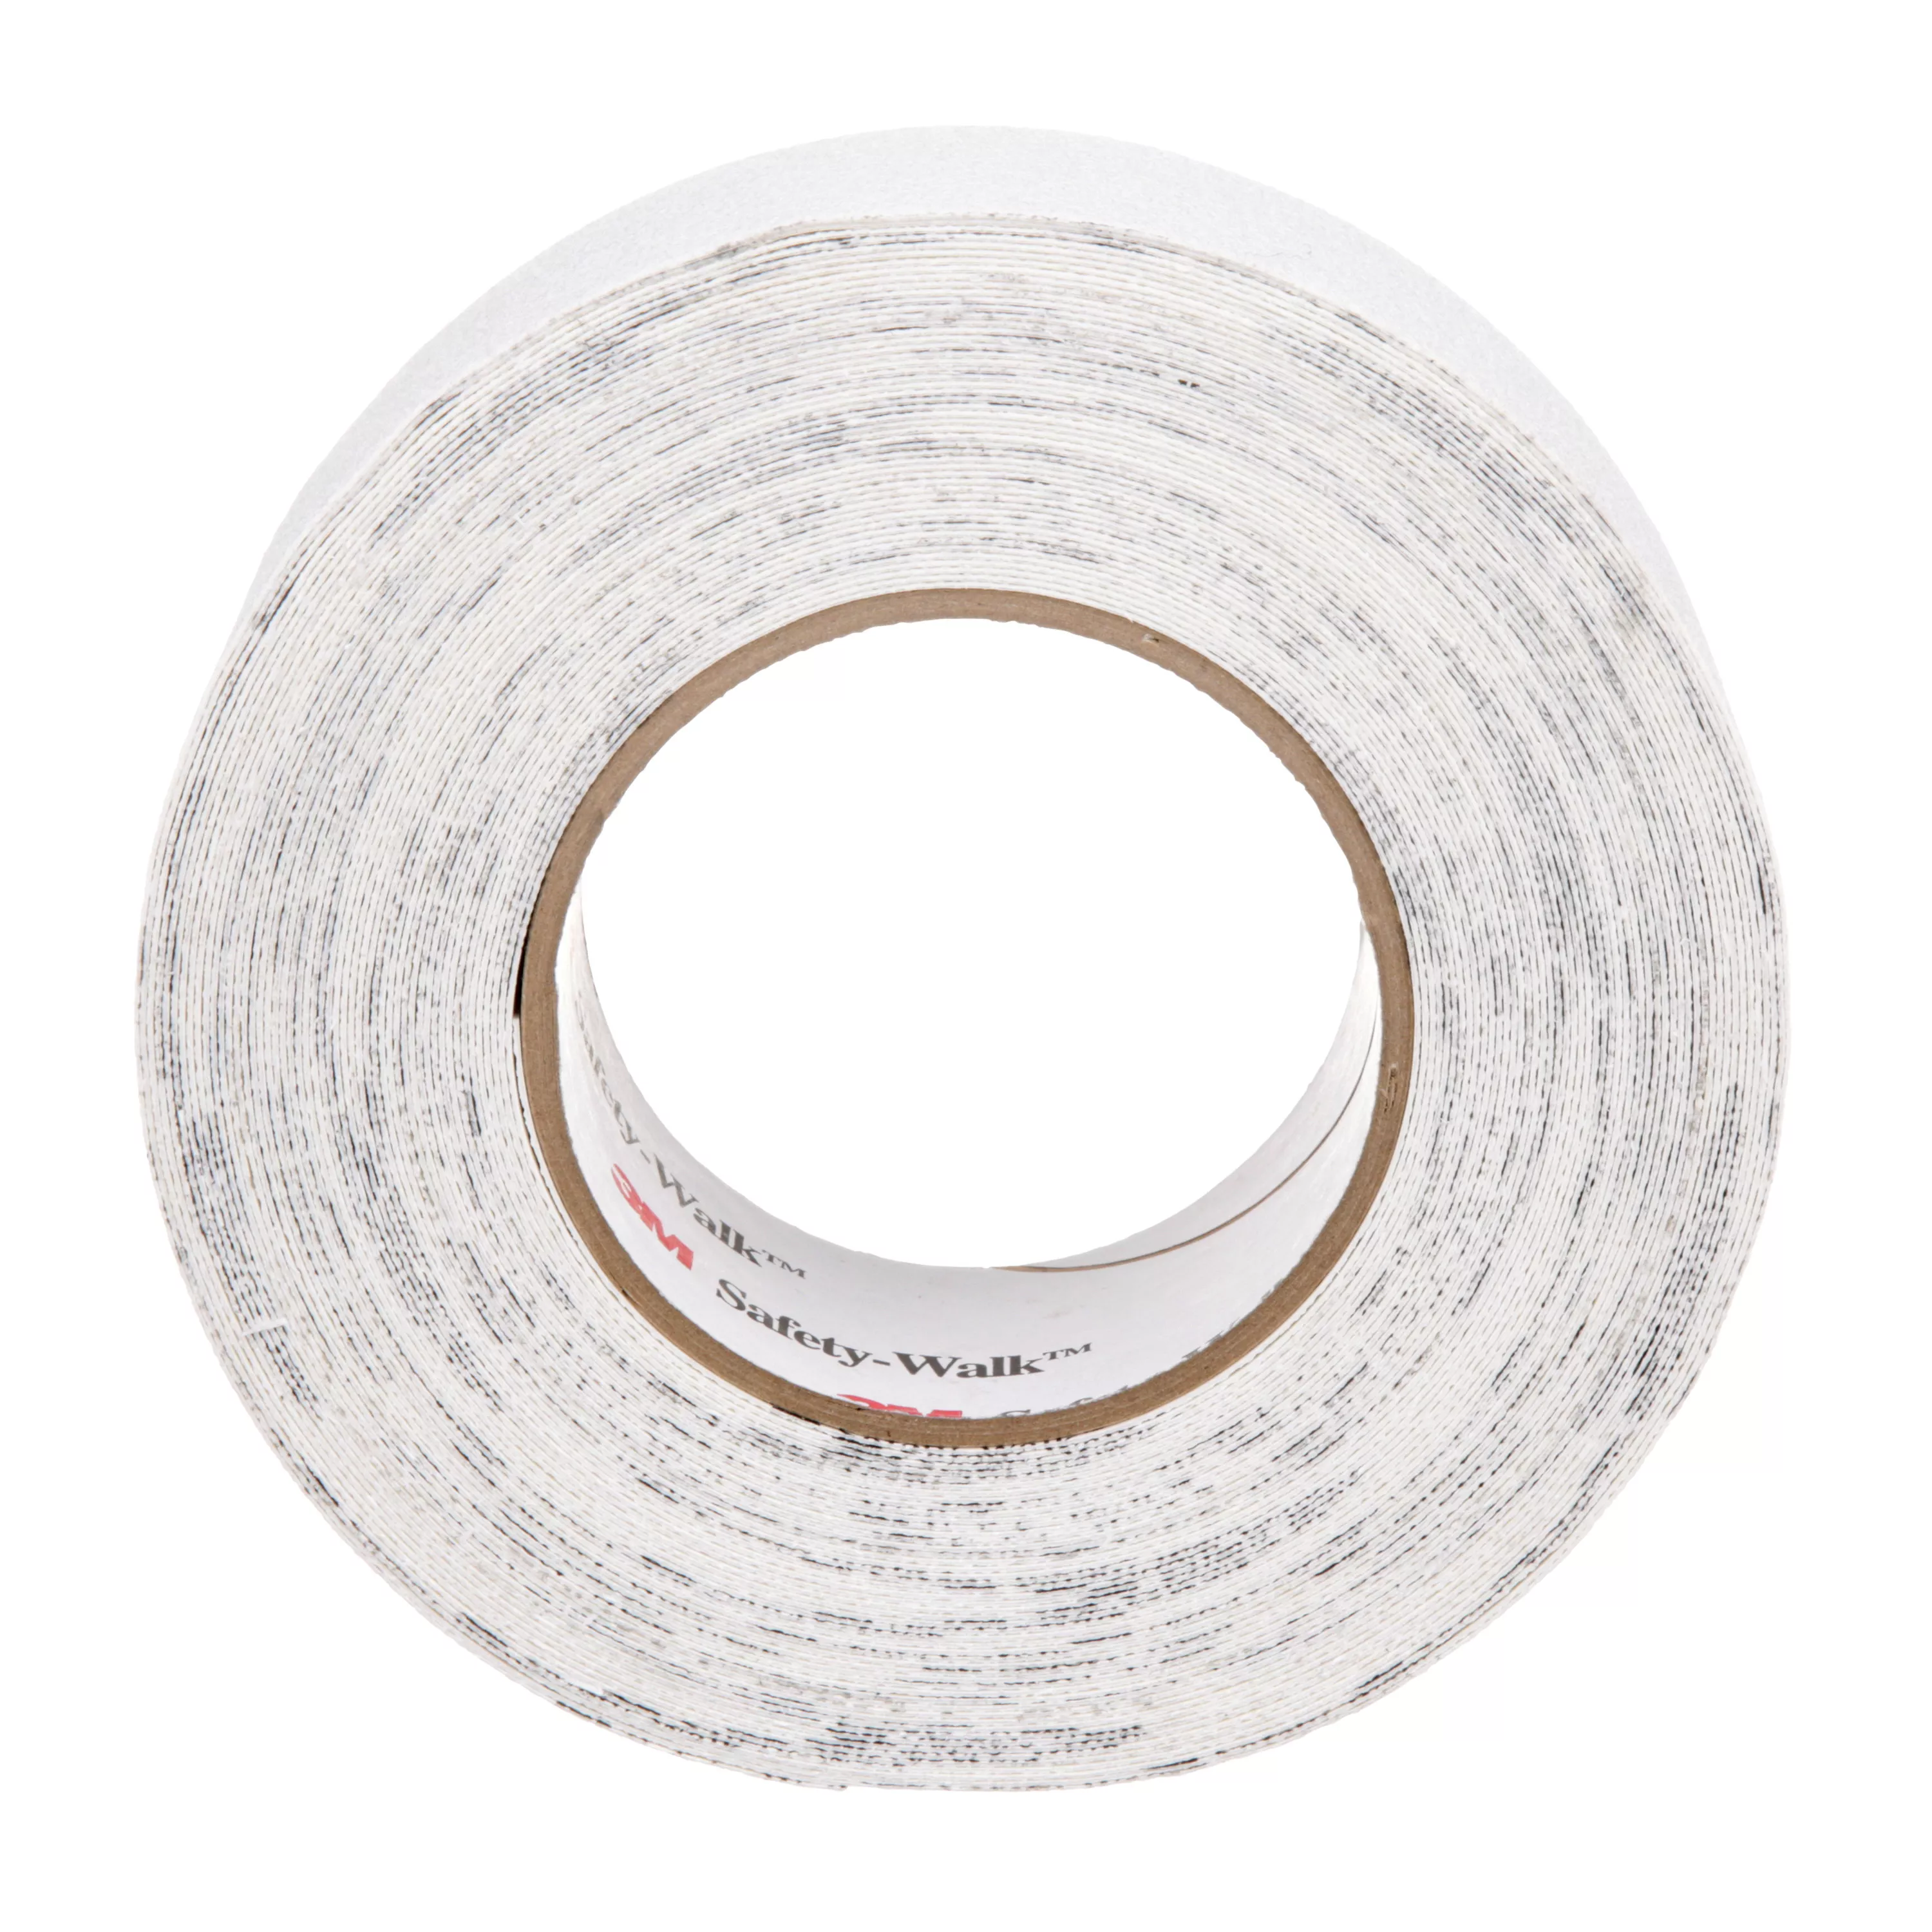 UPC 50048011193163 | 3M™ Safety-Walk™ Slip-Resistant Fine Resilient Tapes & Treads 280